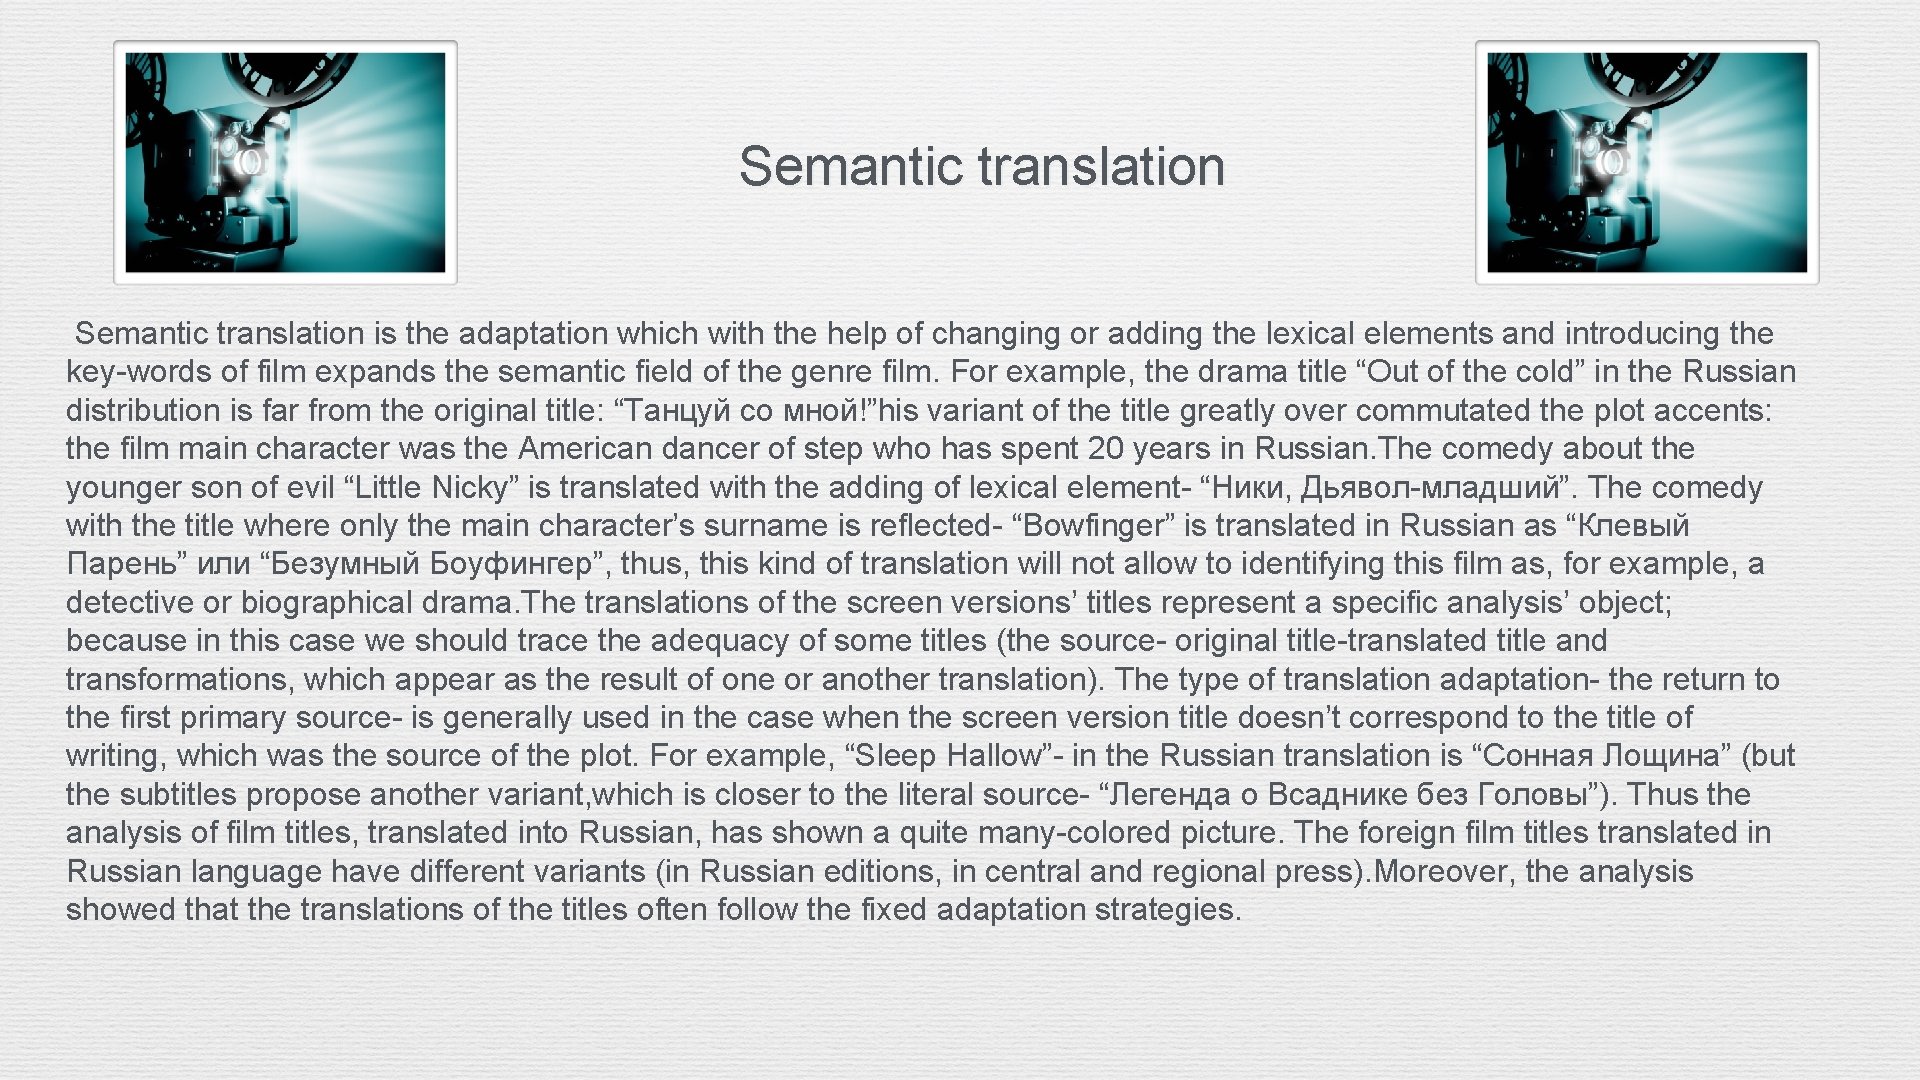  Semantic translation is the adaptation which with the help of changing or adding